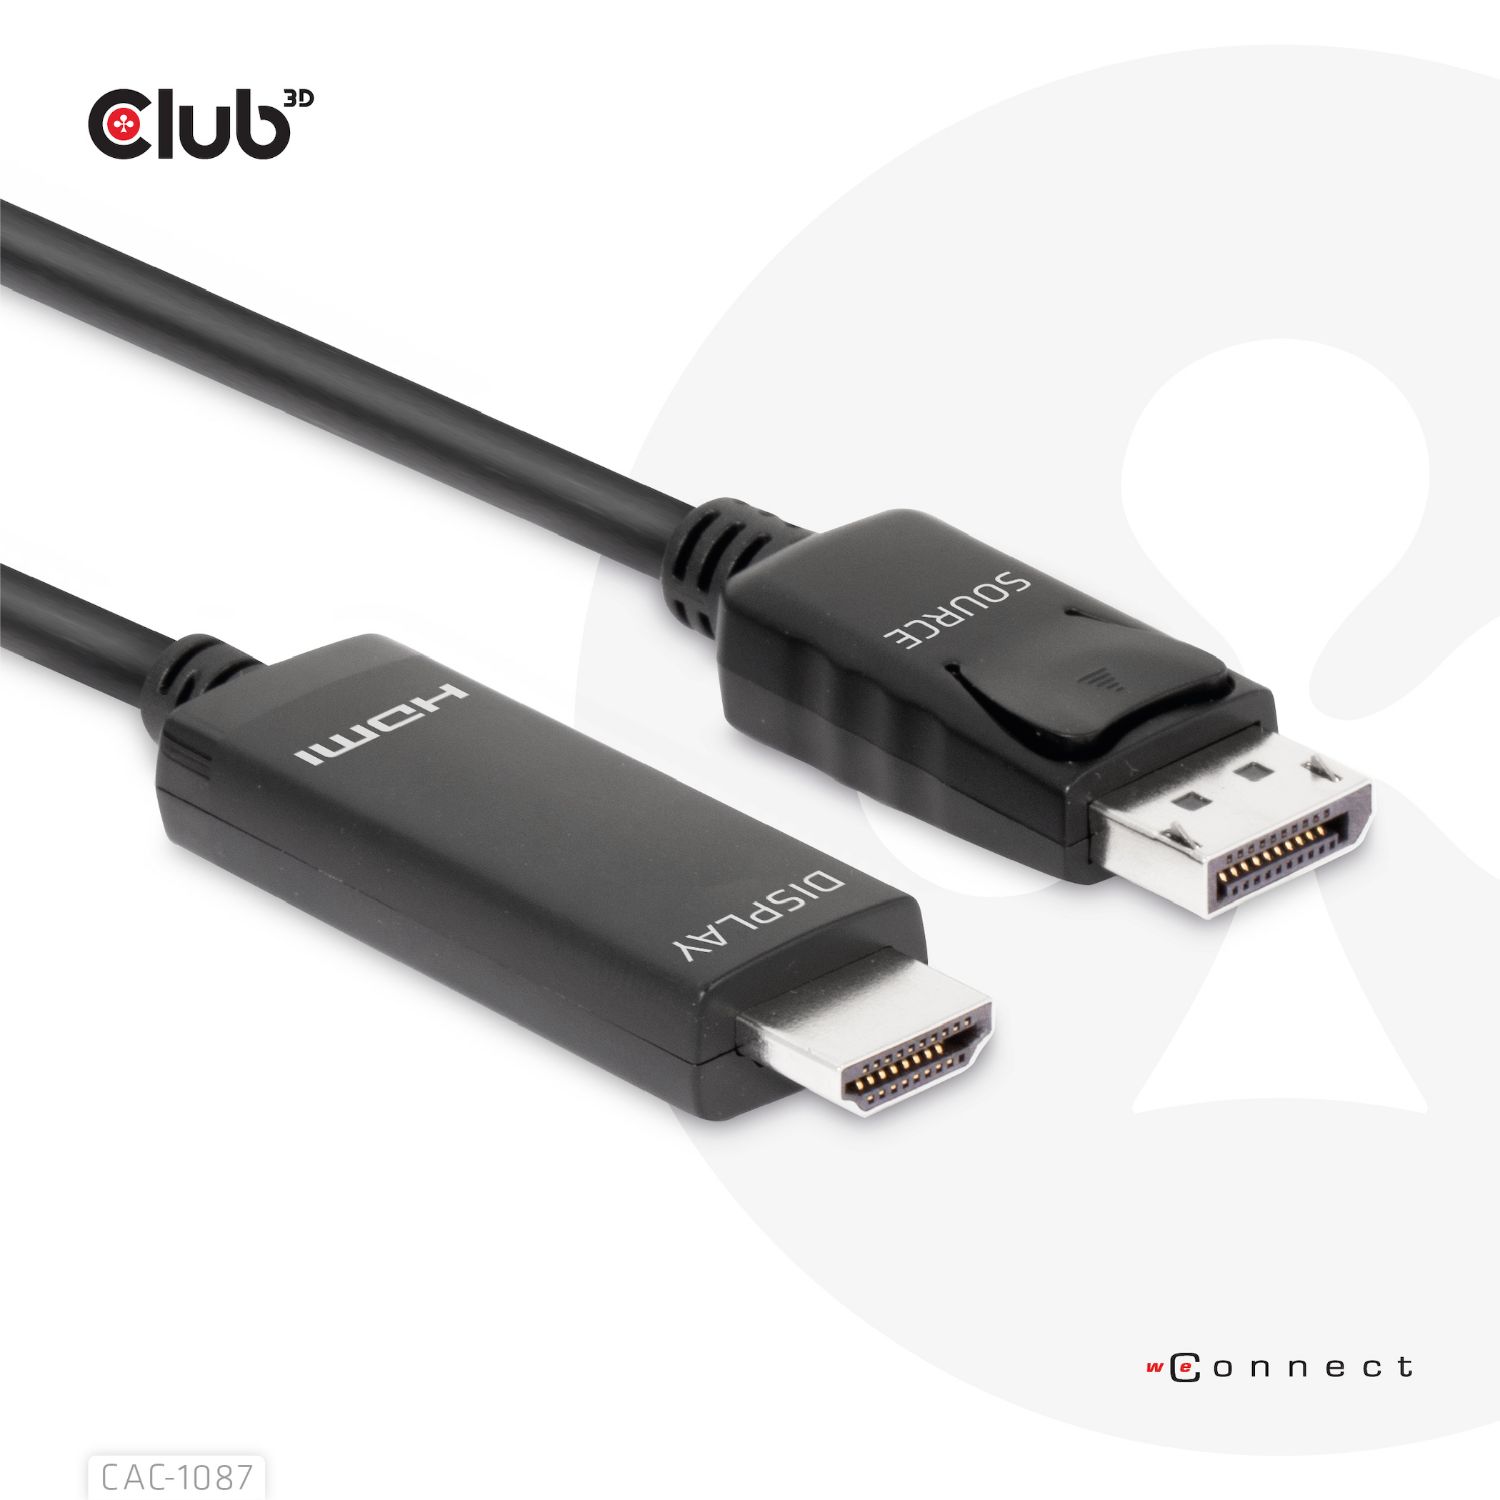 CAC-1087 - Cable Club3D DisplayPort 1.4 a HDMI 4K120Hz or 8K60Hz HDR10 3m (CAC-1087)